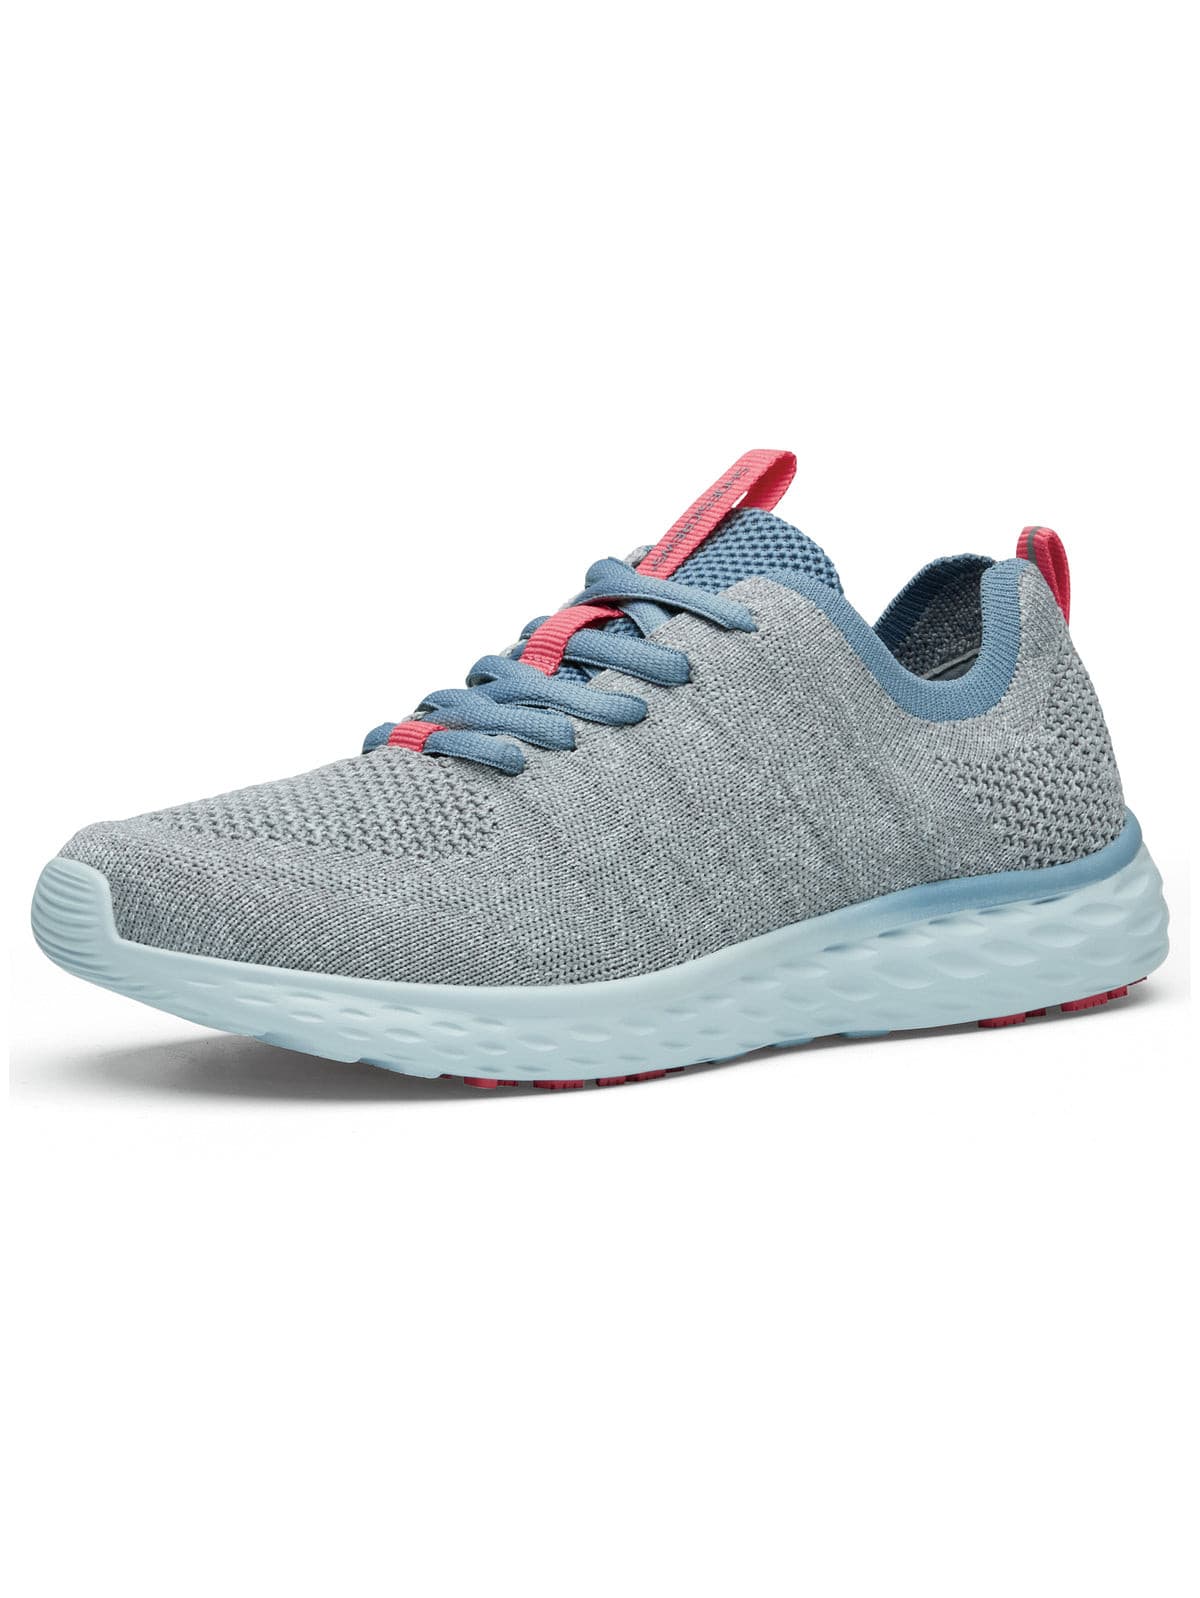 Women's Work Shoe Everlight Gray Blue Coral by  Shoes For Crews.